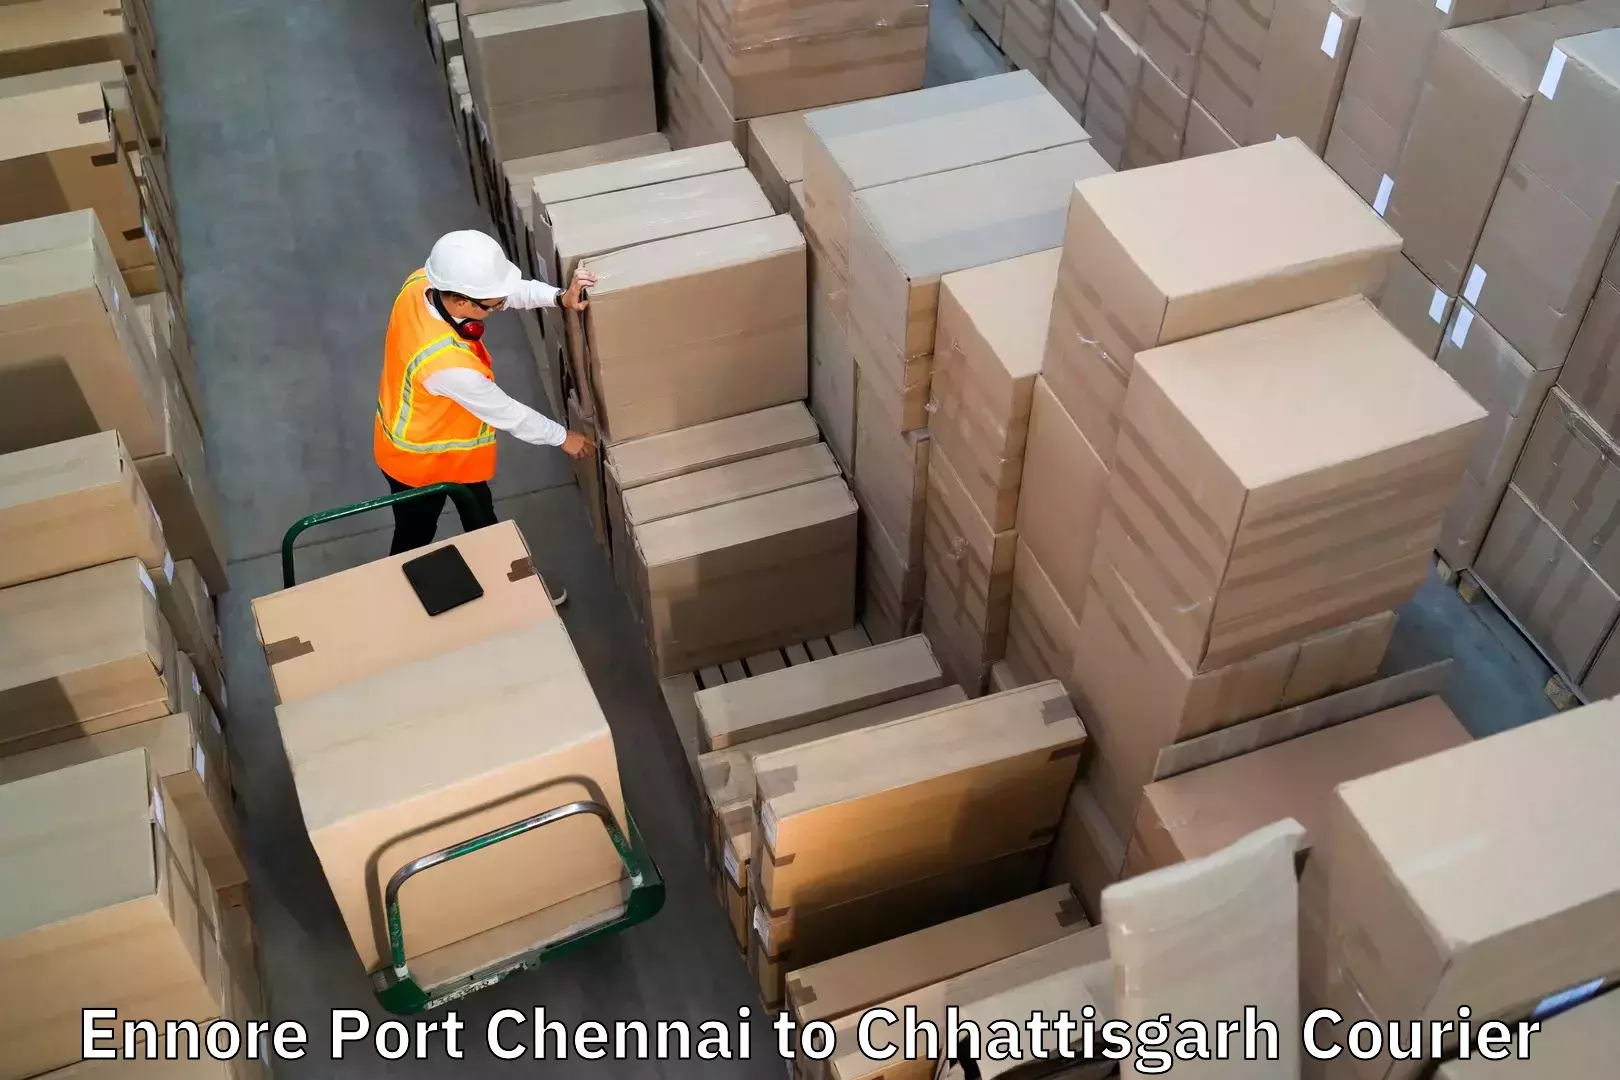 Door to door luggage delivery Ennore Port Chennai to Pakhanjur